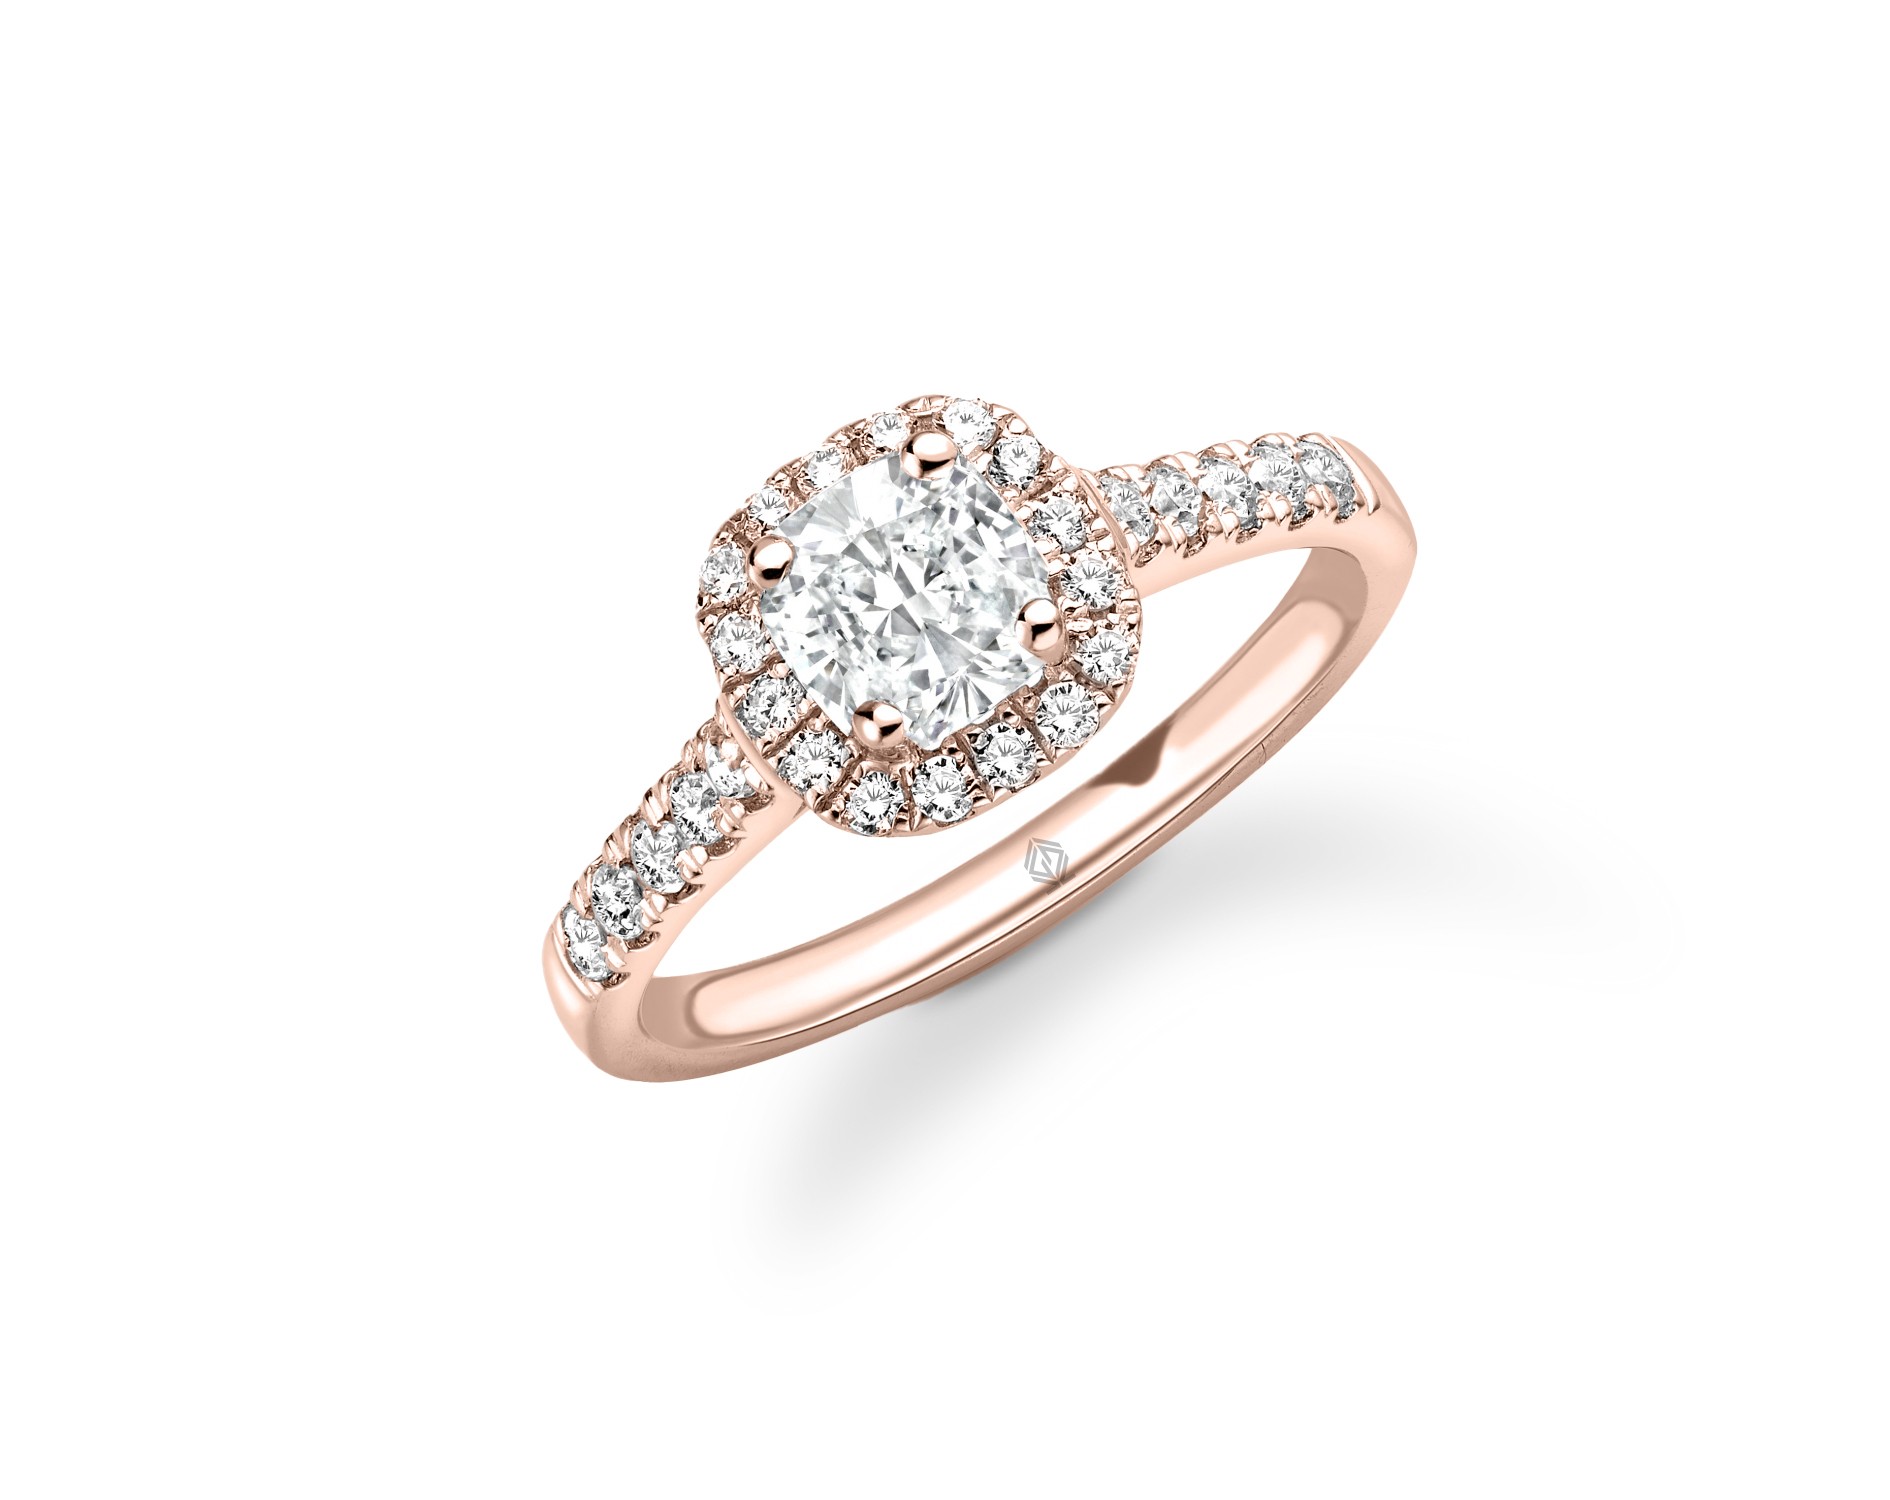 18K ROSE GOLD CUSHION SHAPED HALO DIAMOND ENGAGEMENT RING WITH SIDE STONES IN PAVE SET